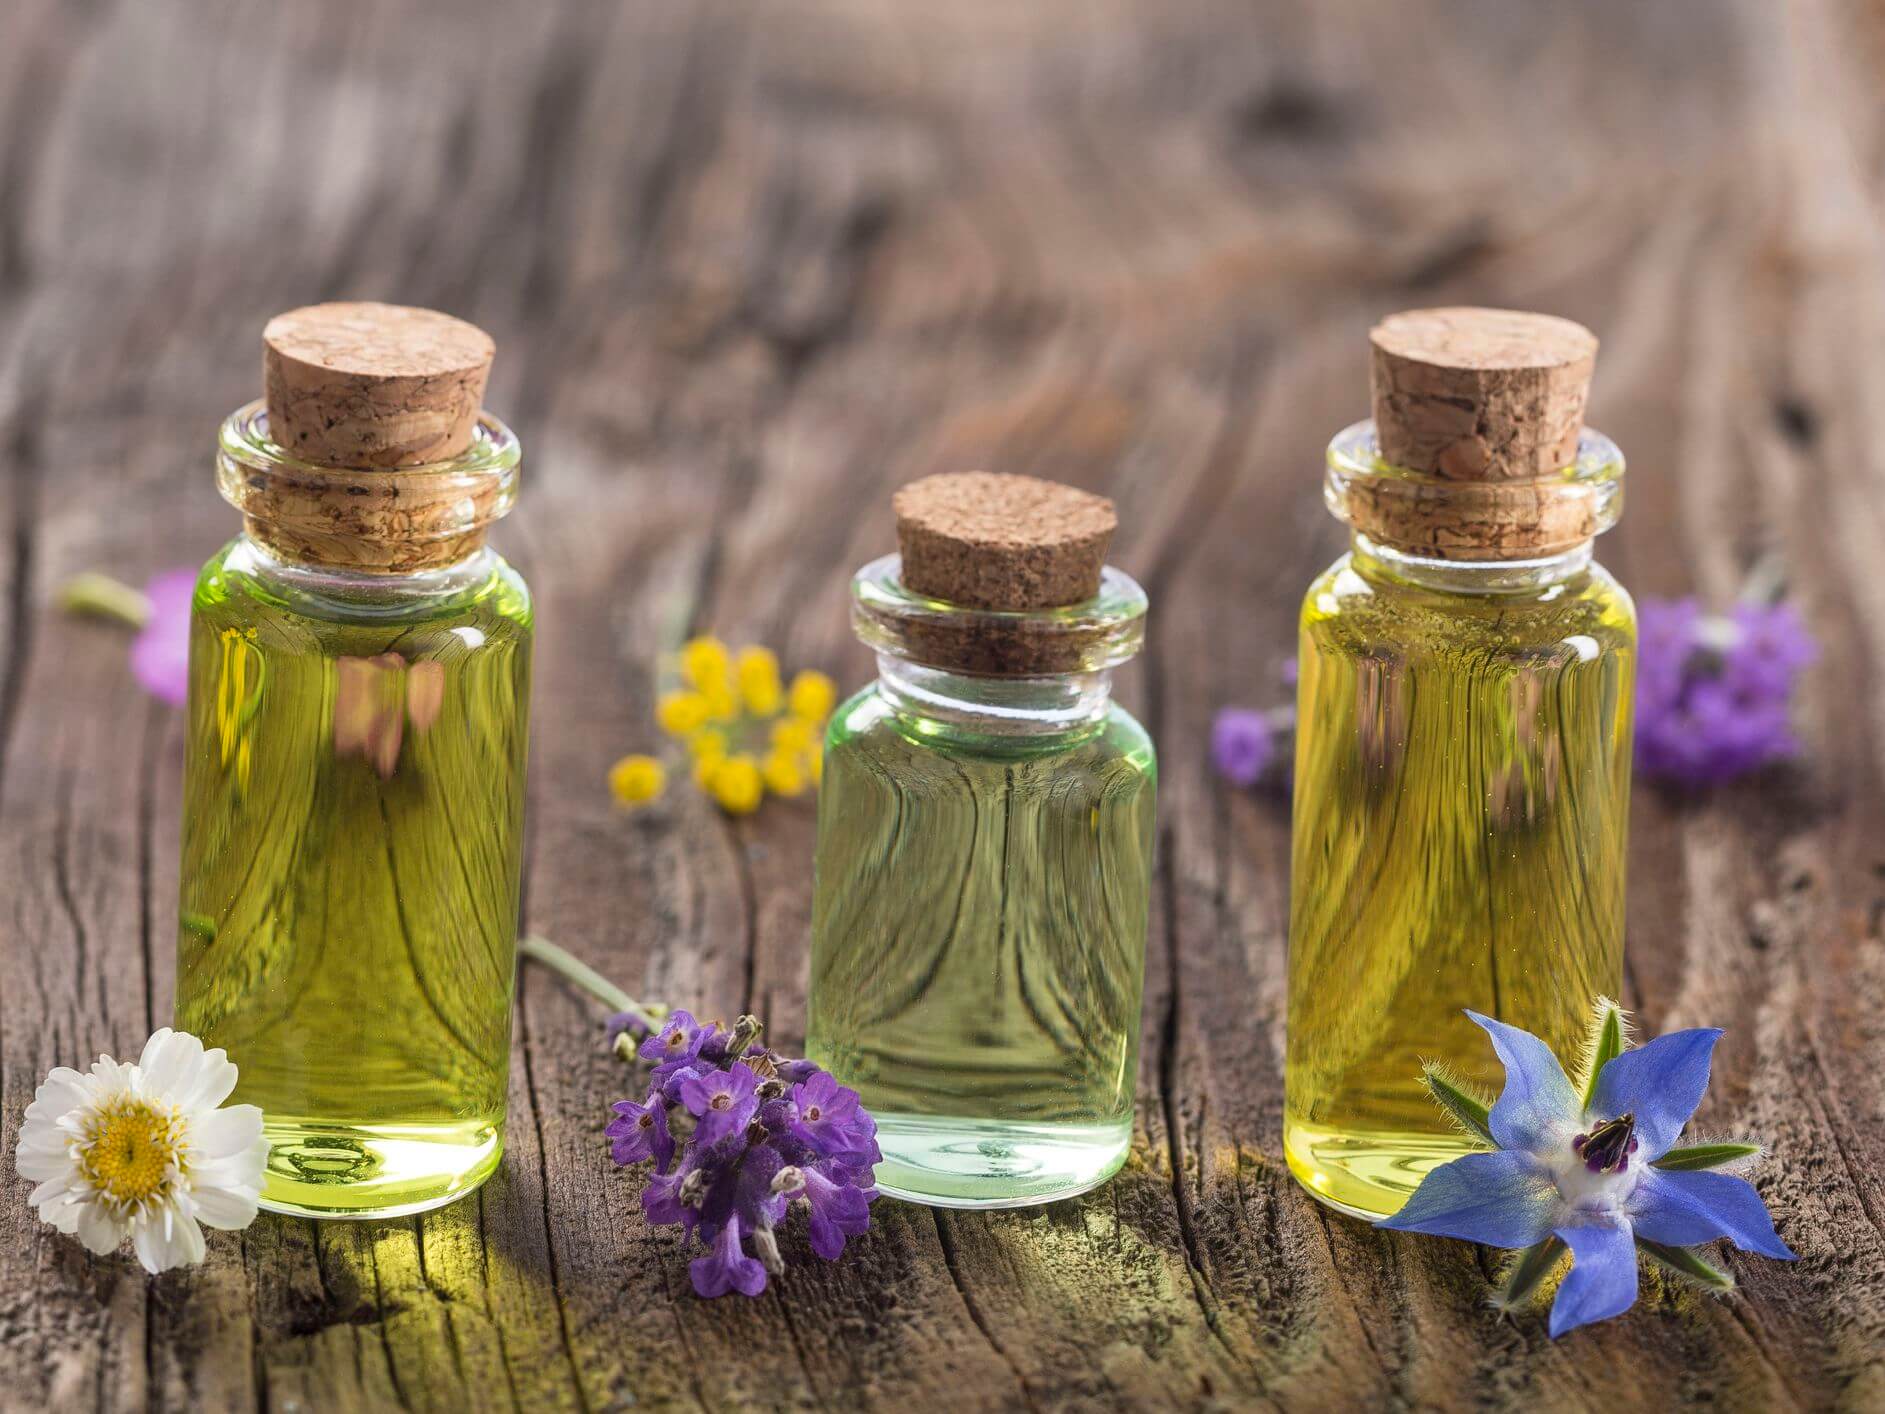 Best Essential Oils For Hair Growth